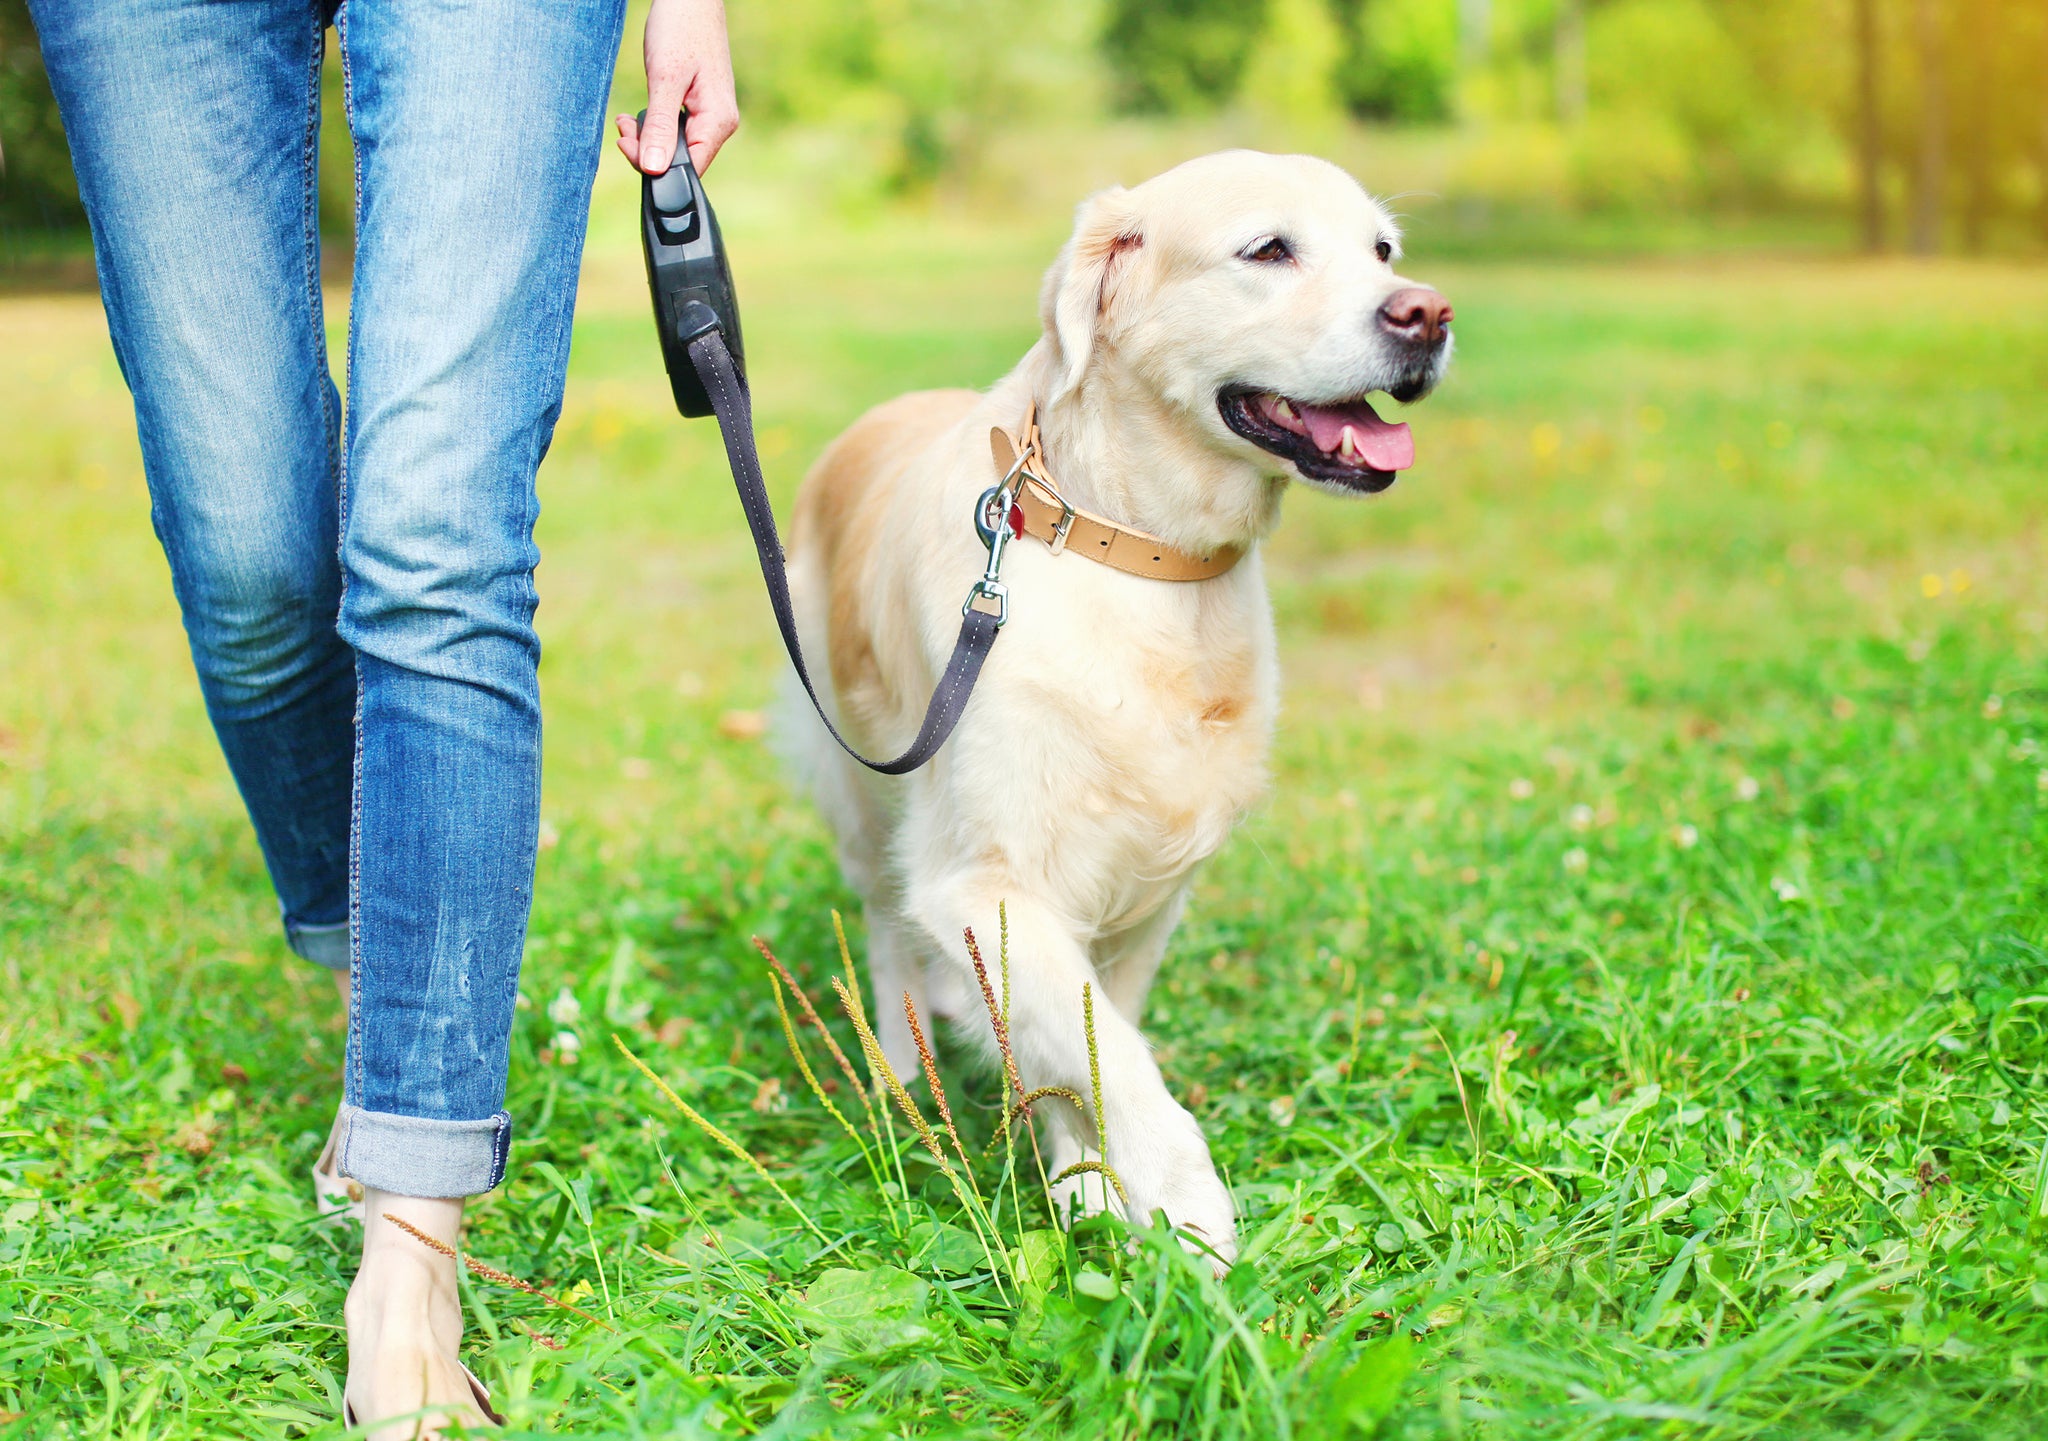 What is a Good Length for a Dog Leash?